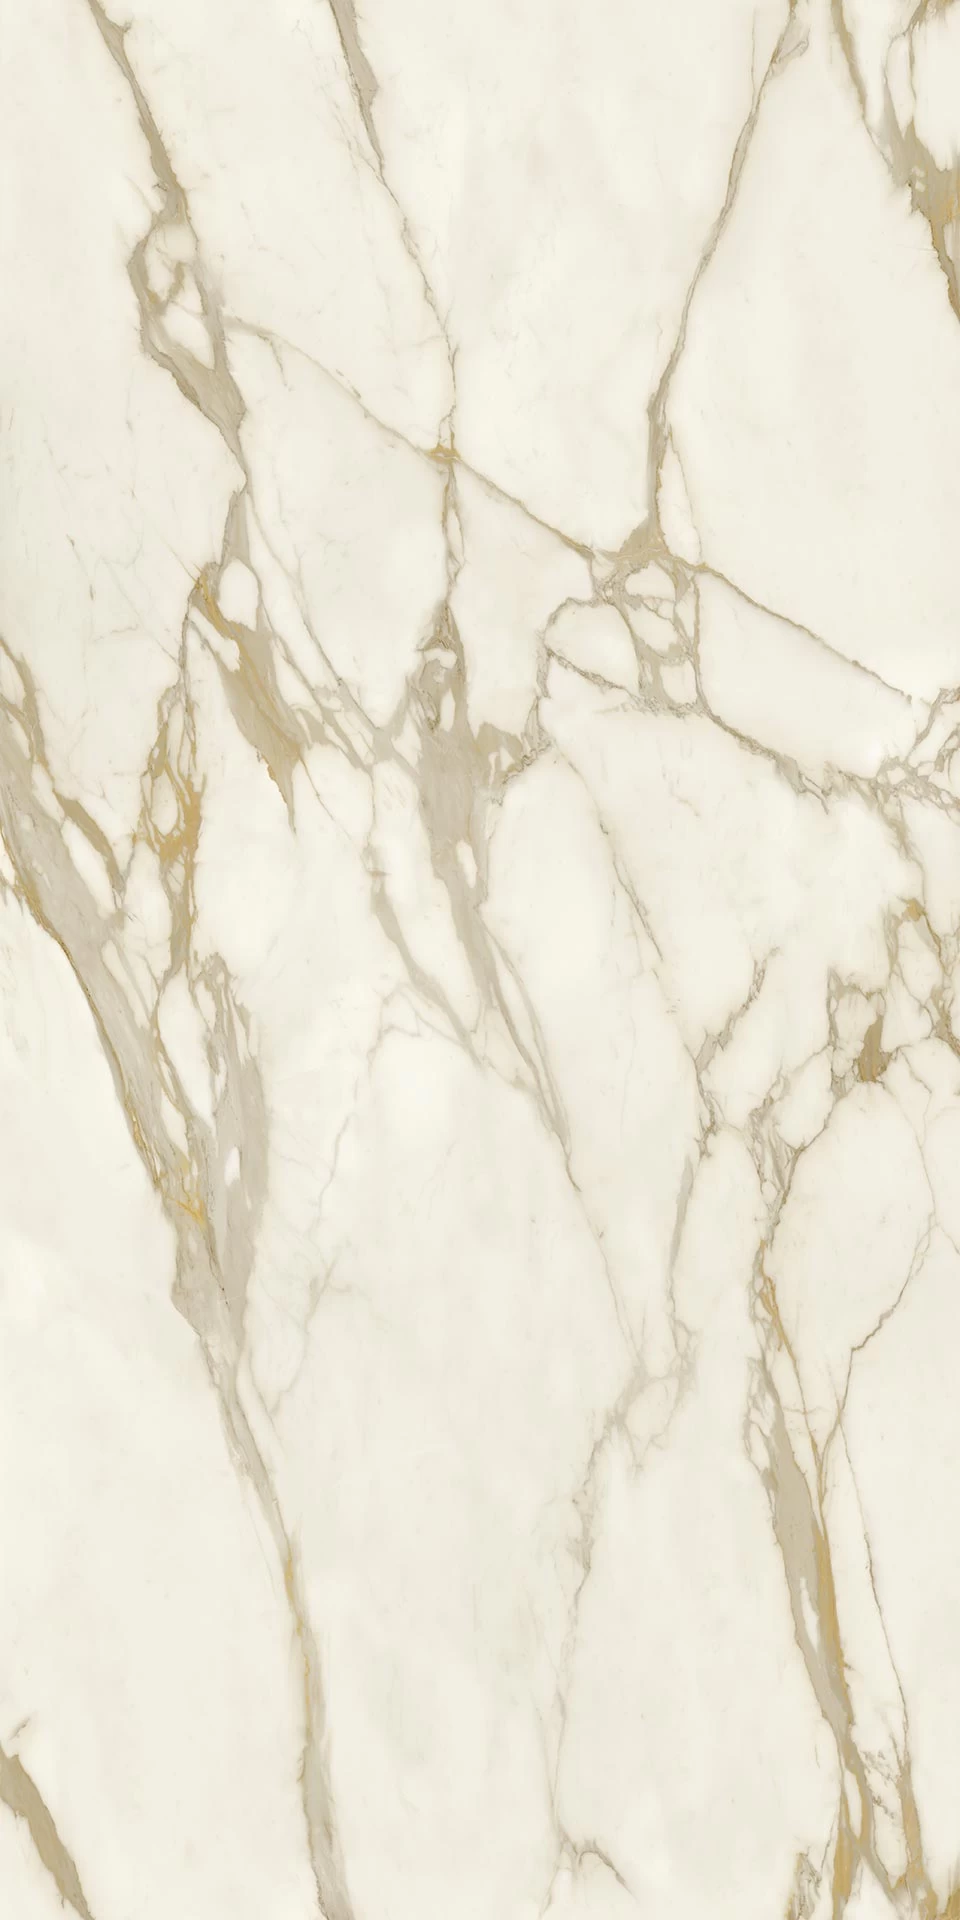 Calacatta Gold marble look porcelain stoneware slabs for table tops